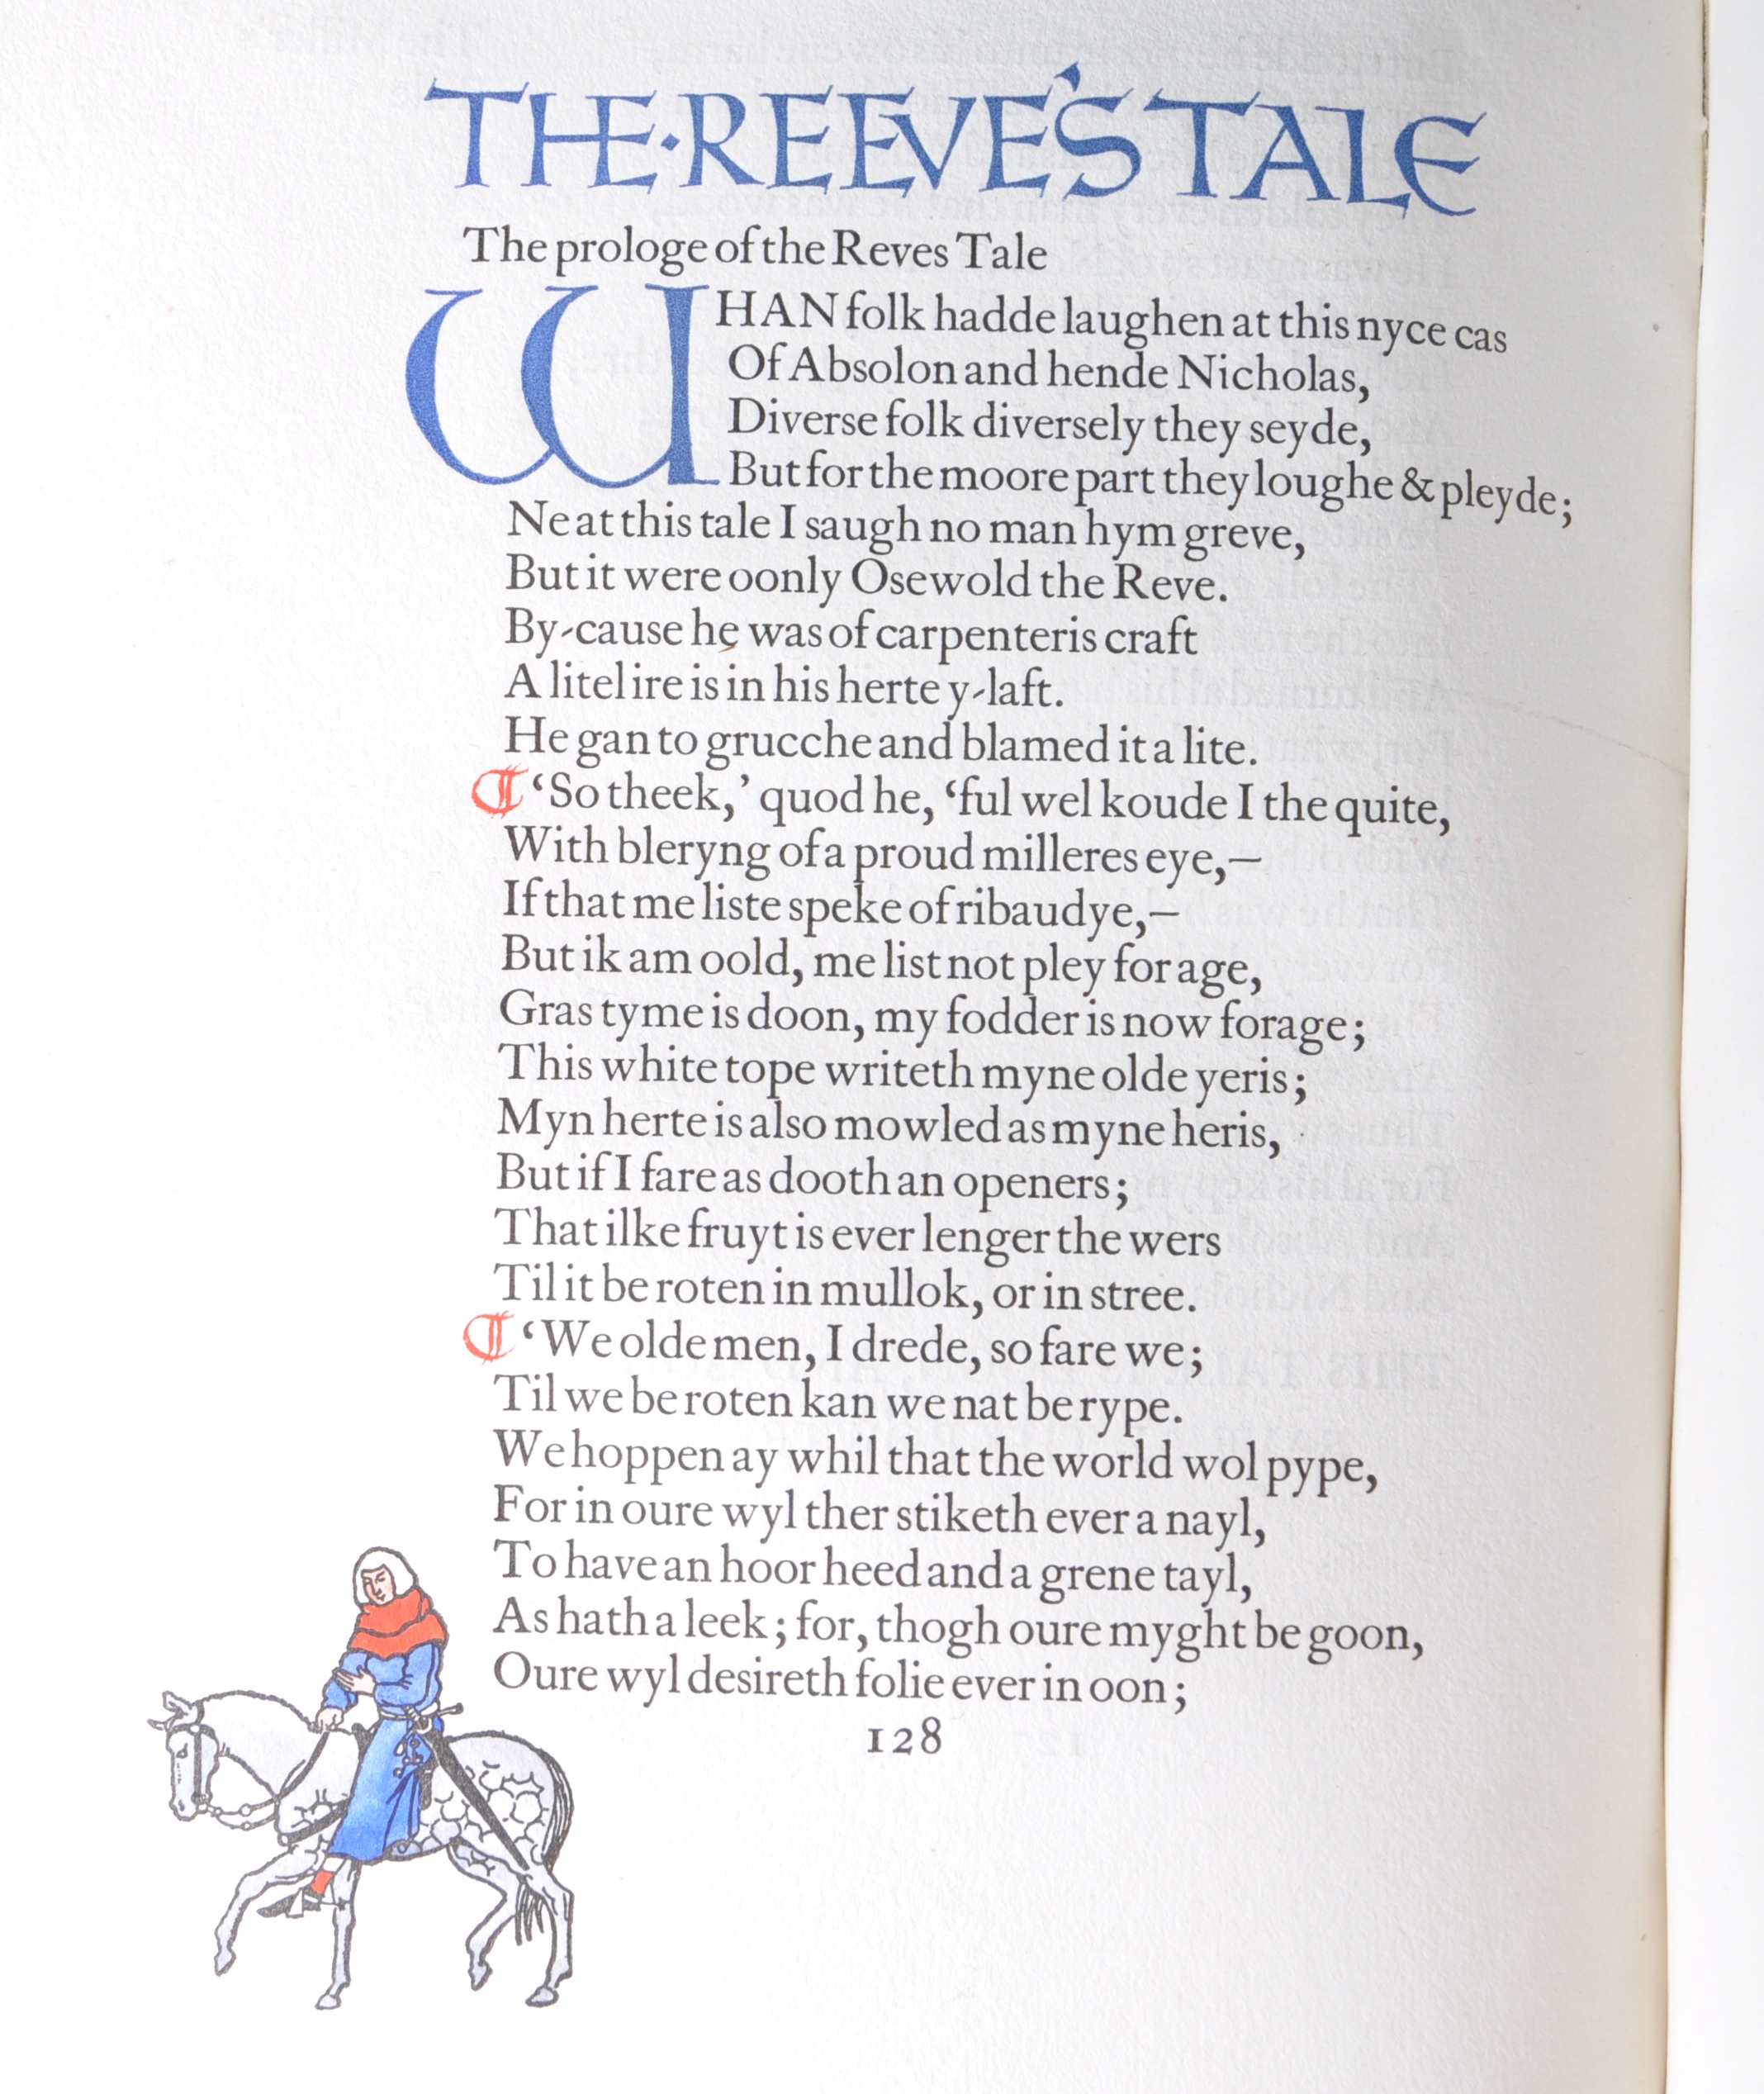 THE WORKS OF GEOFFREY CHAUCER - 1928 - LIMITED EDITION - Image 5 of 7